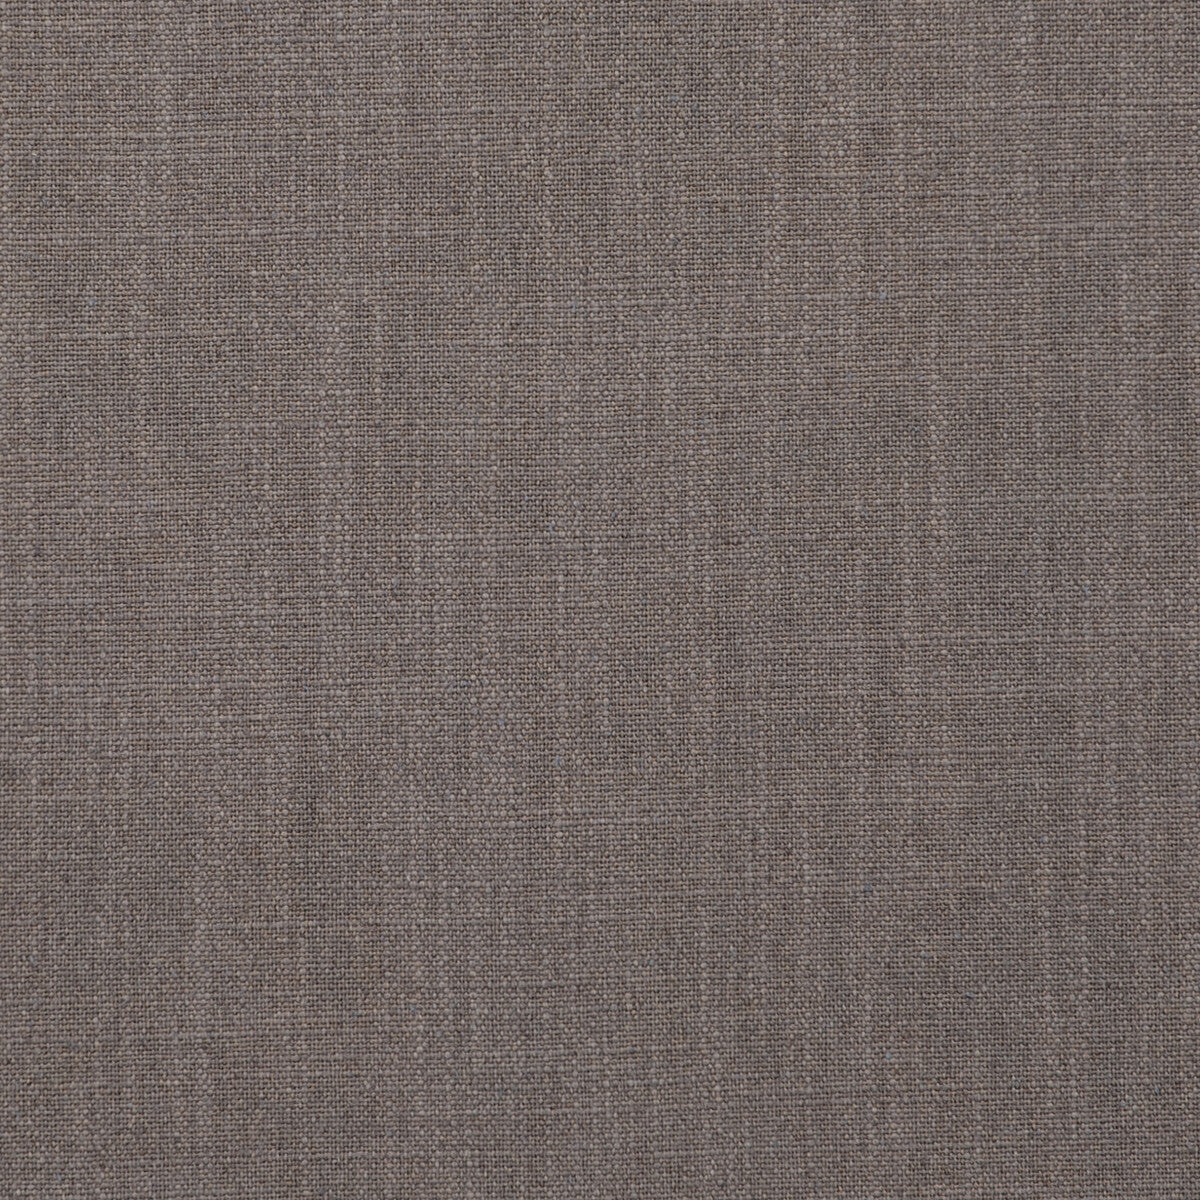 Easton fabric in nickel color - pattern F0736/06.CAC.0 - by Clarke And Clarke in the Clarke &amp; Clarke Manor House collection